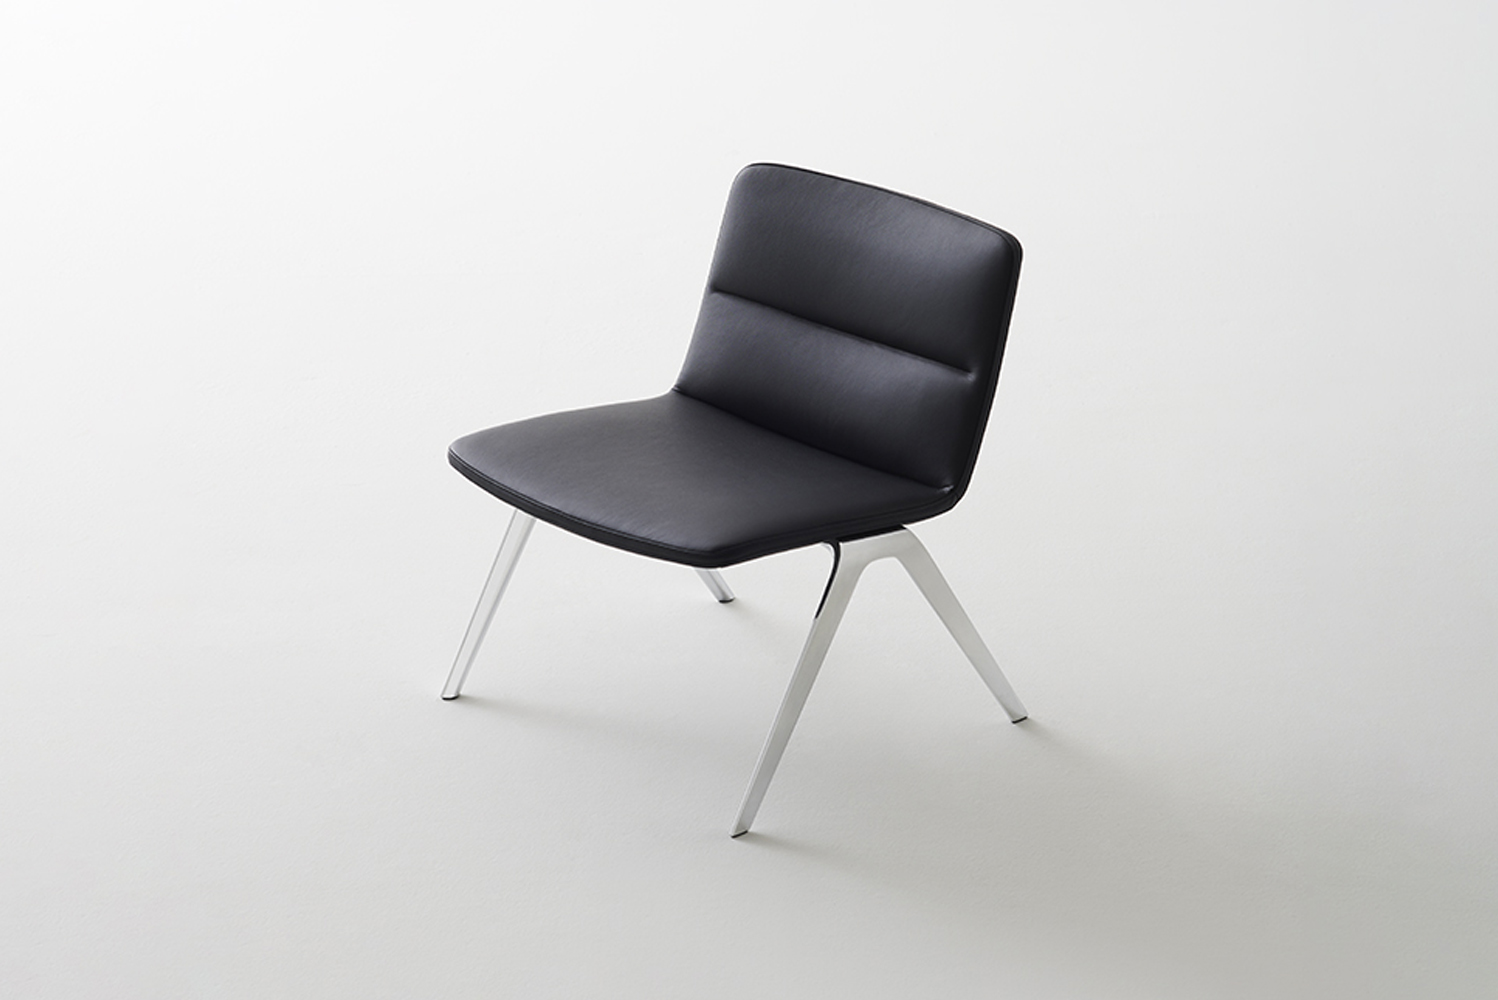 Davis Furniture introduced the A-Lounge seating designed by jehslaub 